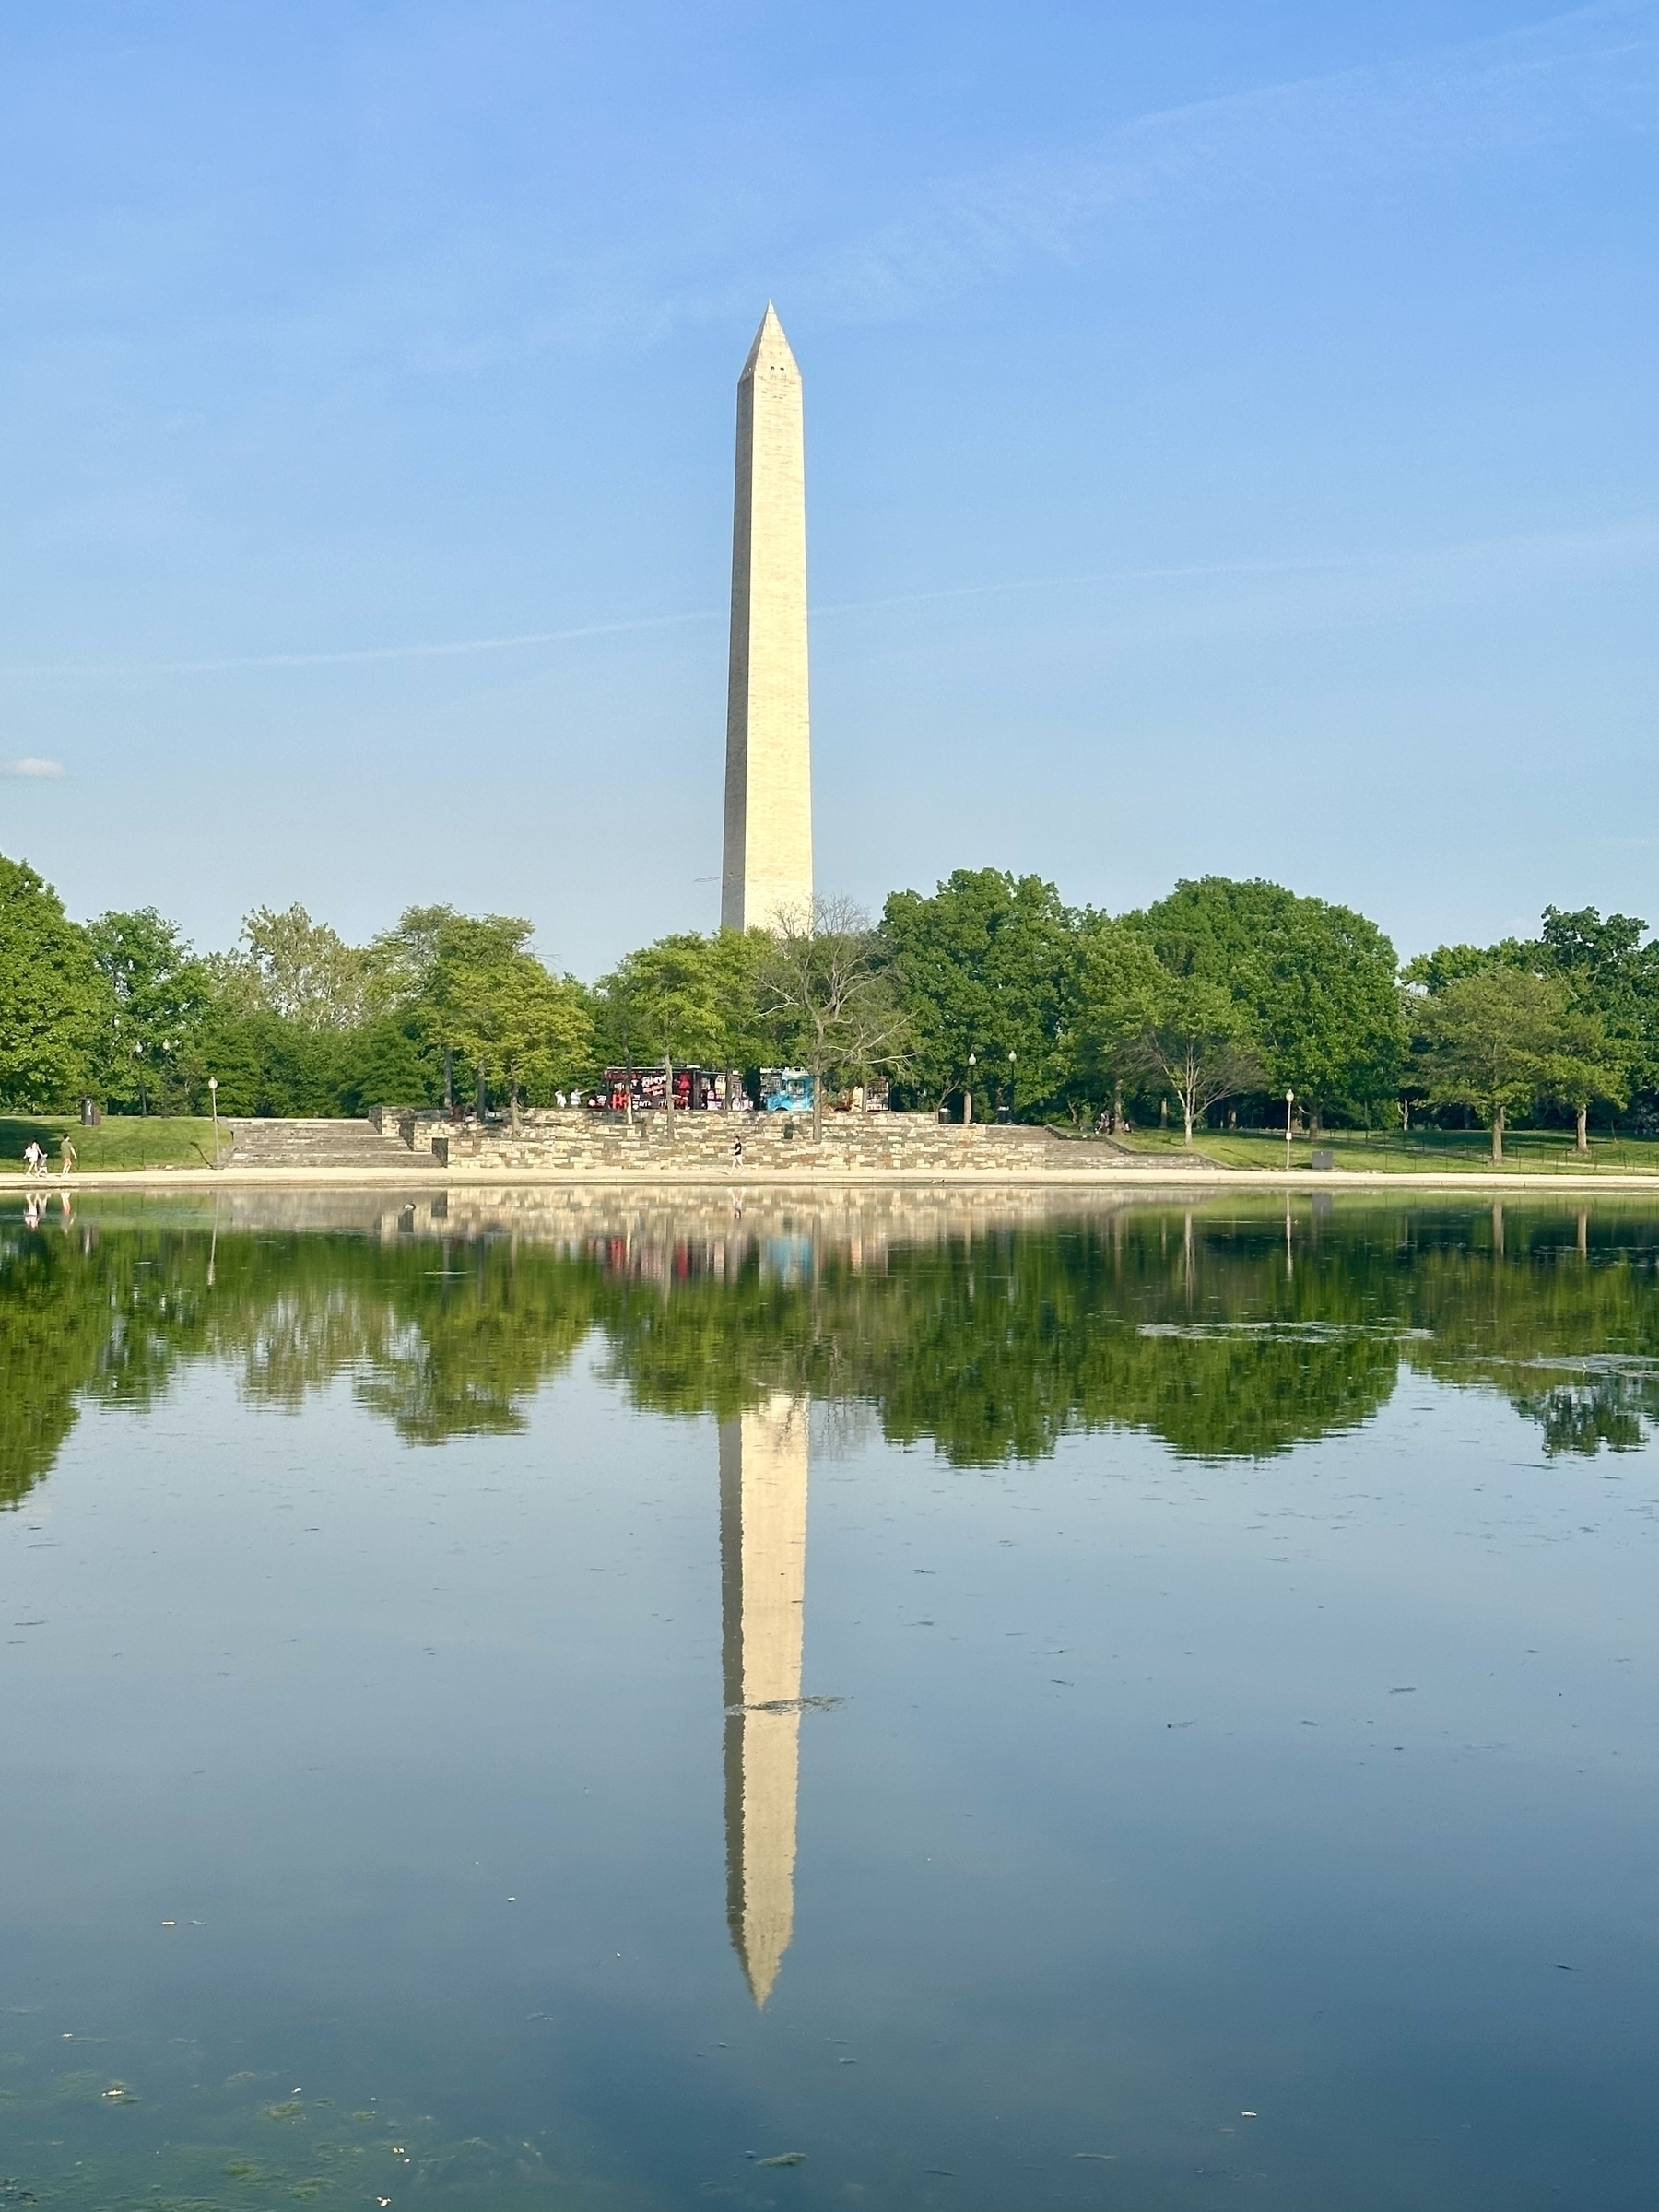 The Washington monument reflect in water on a clear sunny day.